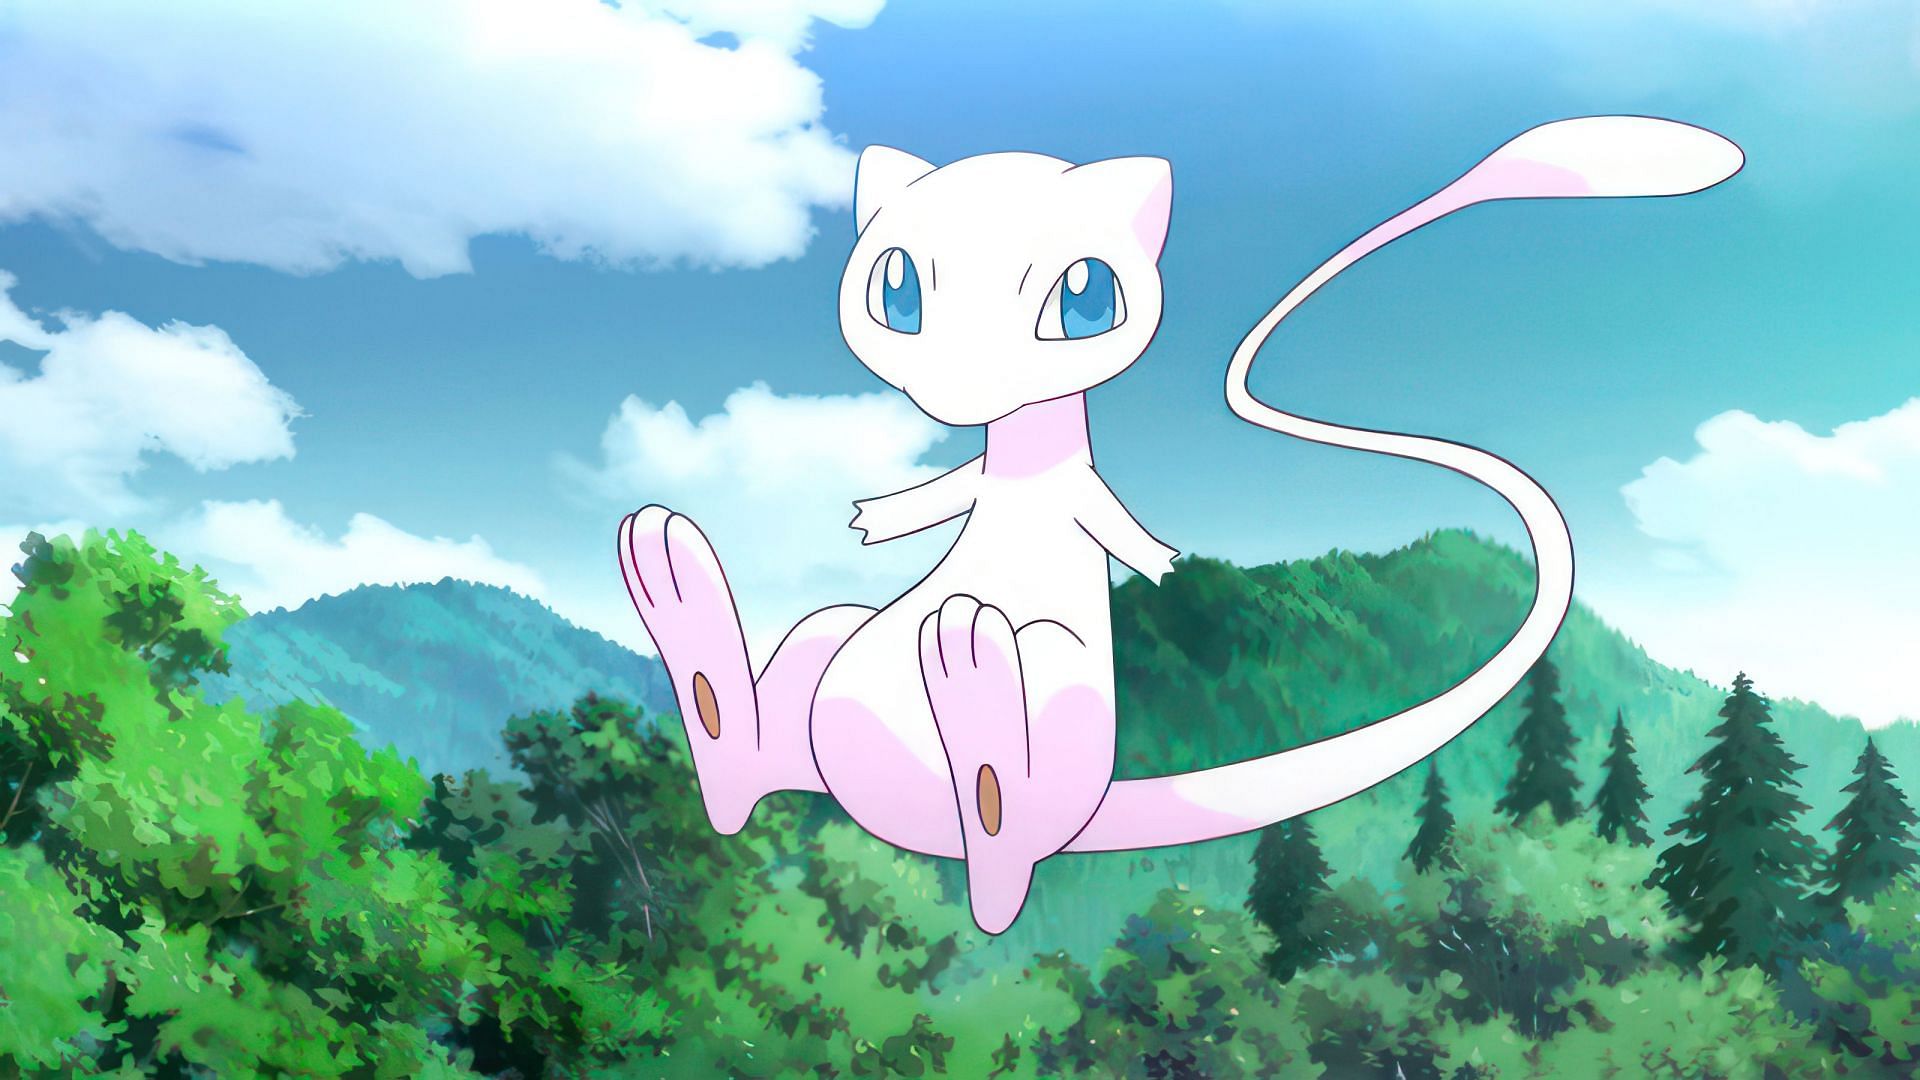 Mew as seen in the anime (Image via The Pokemon Company)